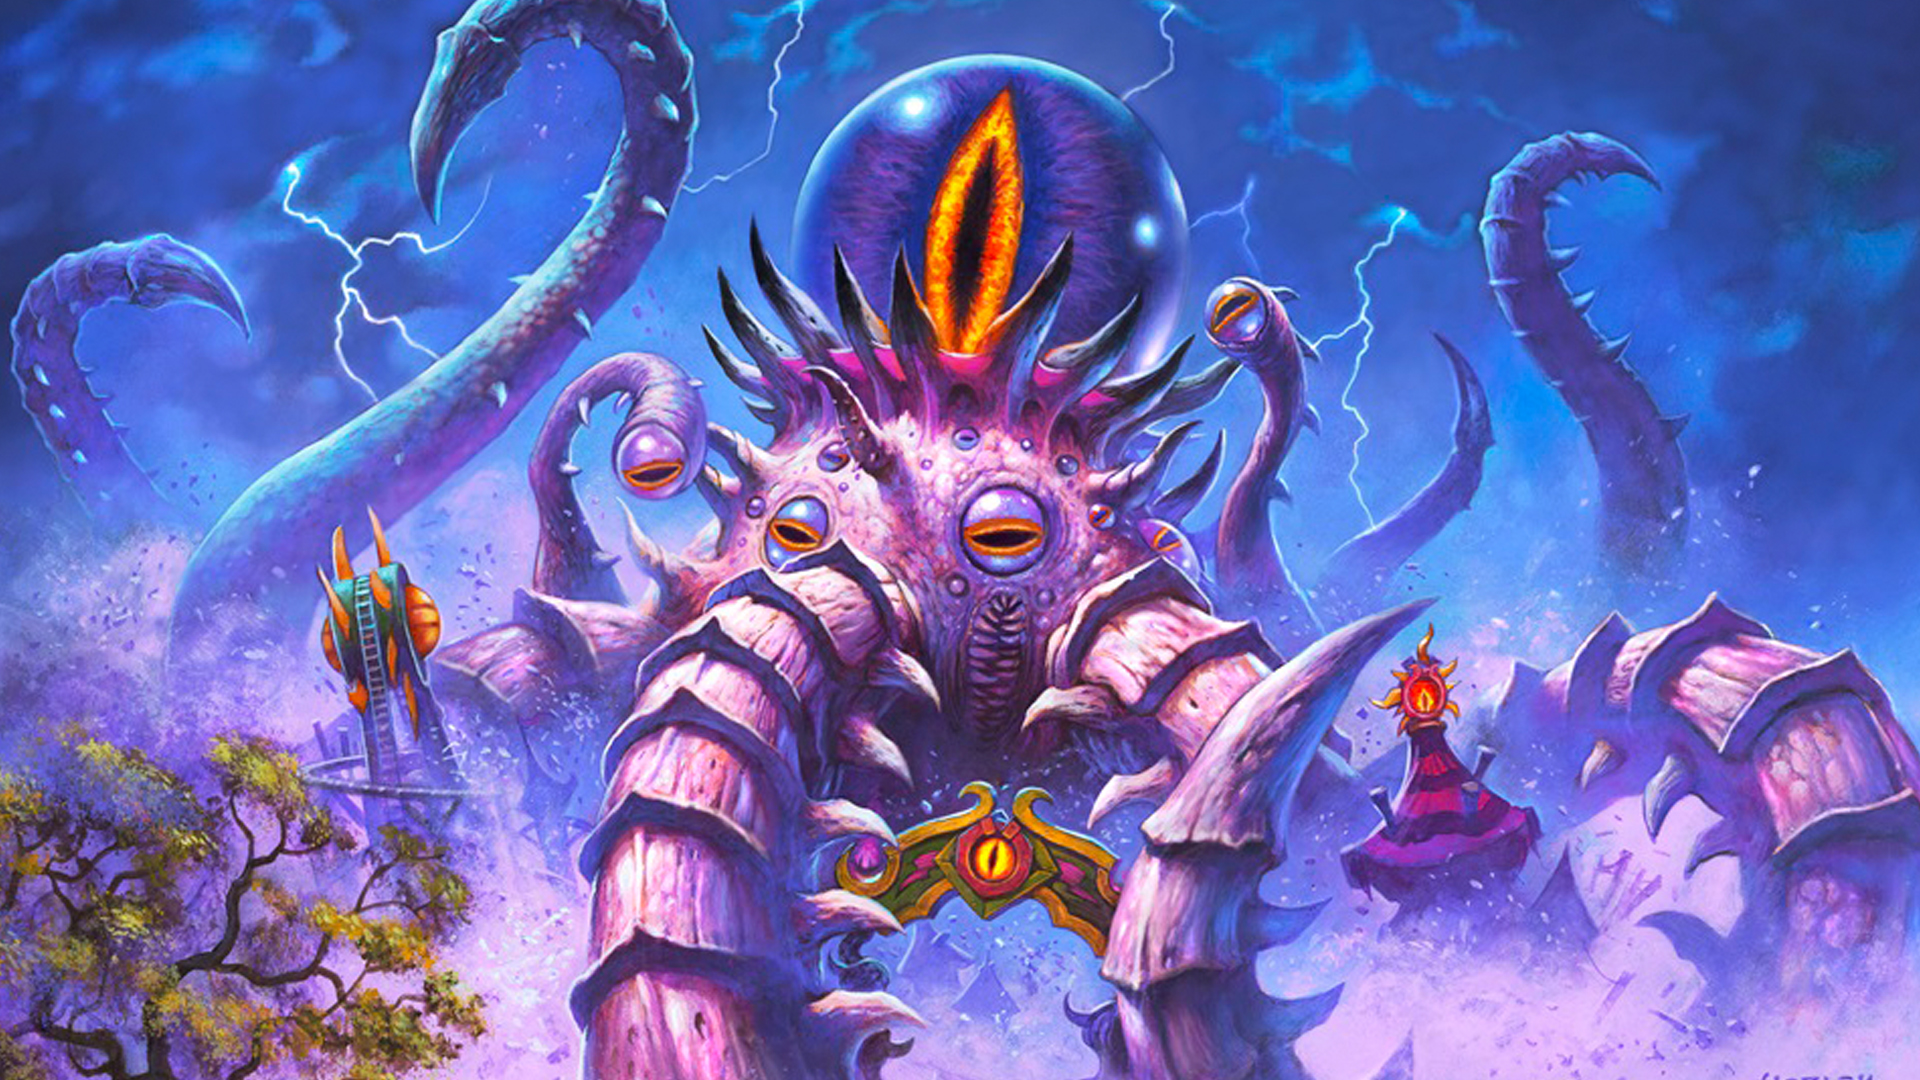  Darkmoon Races is Hearthstone's first 'mini-set', with 35 new cards 